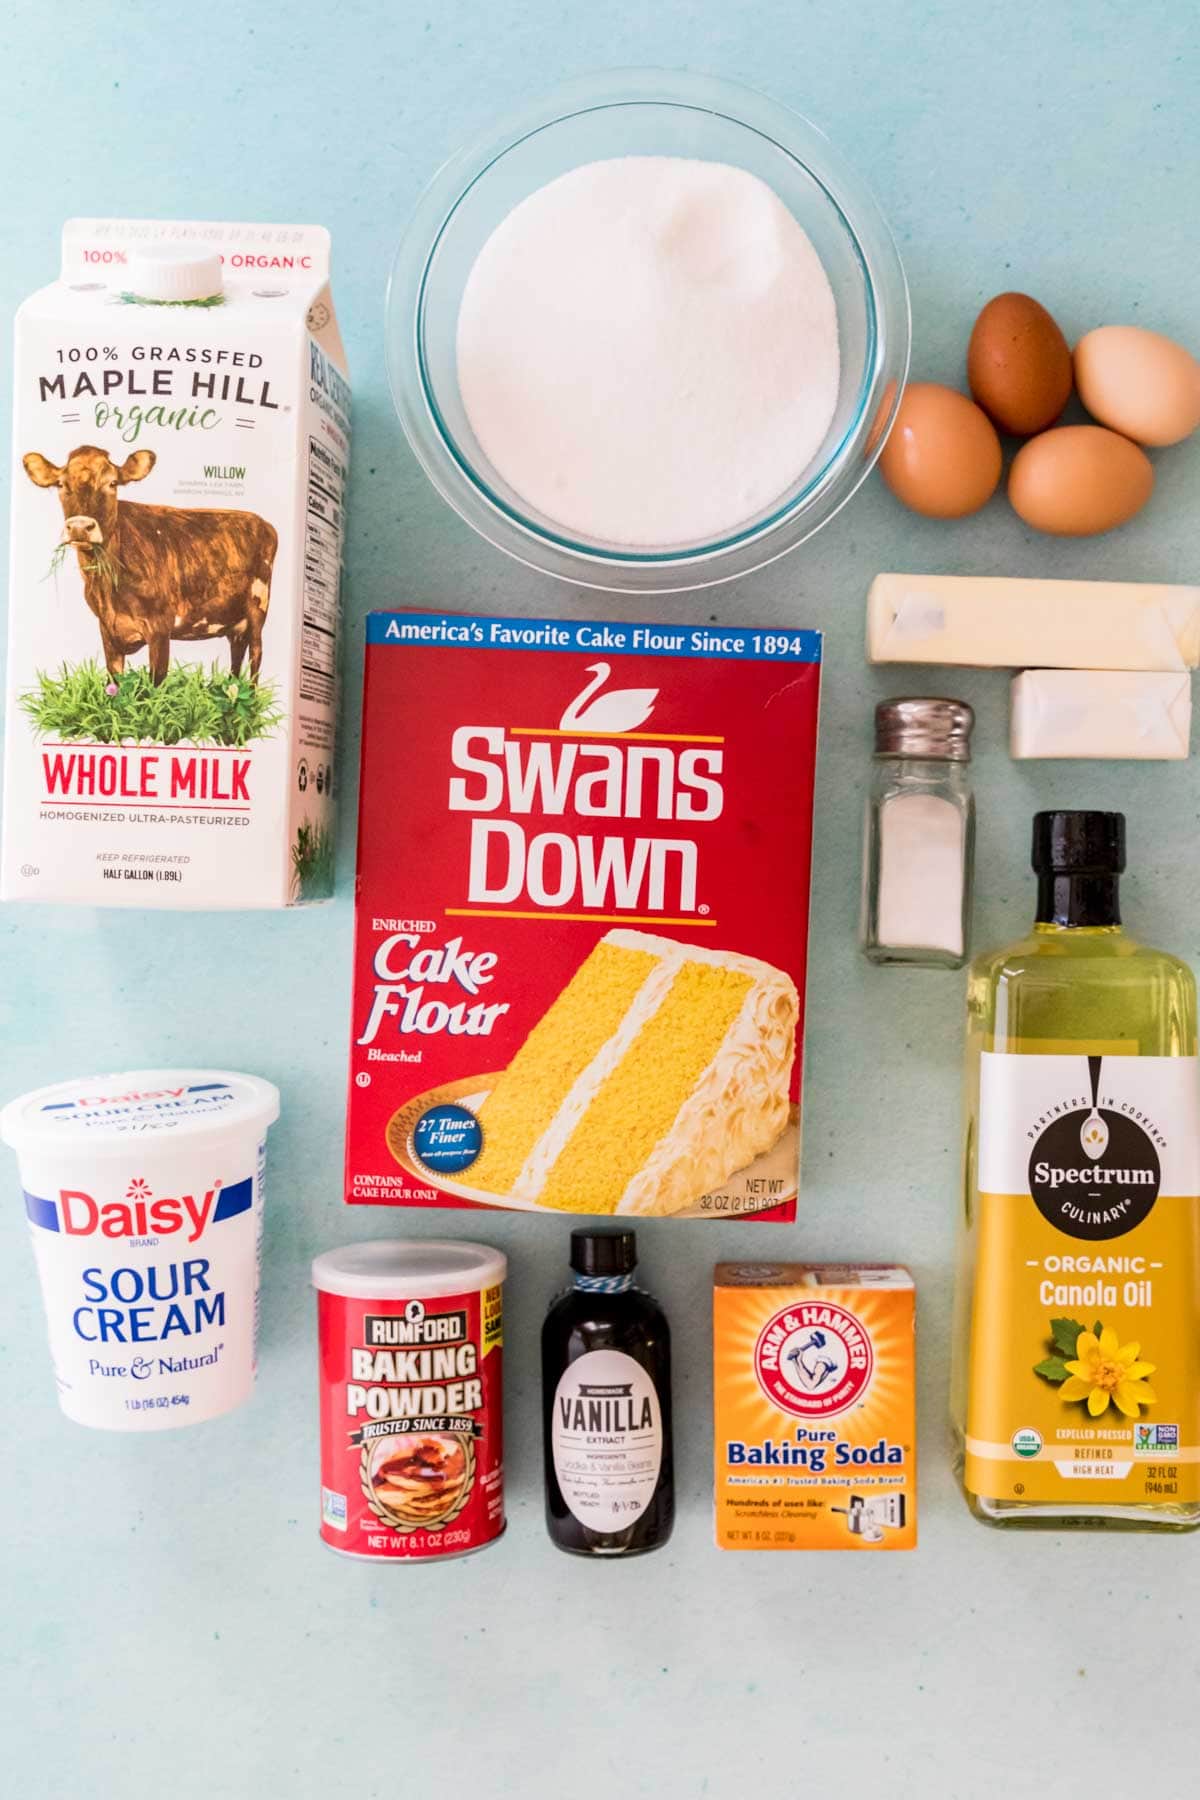 Overhead view of ingredients including cake flour, milk, eggs, sour cream, and more.